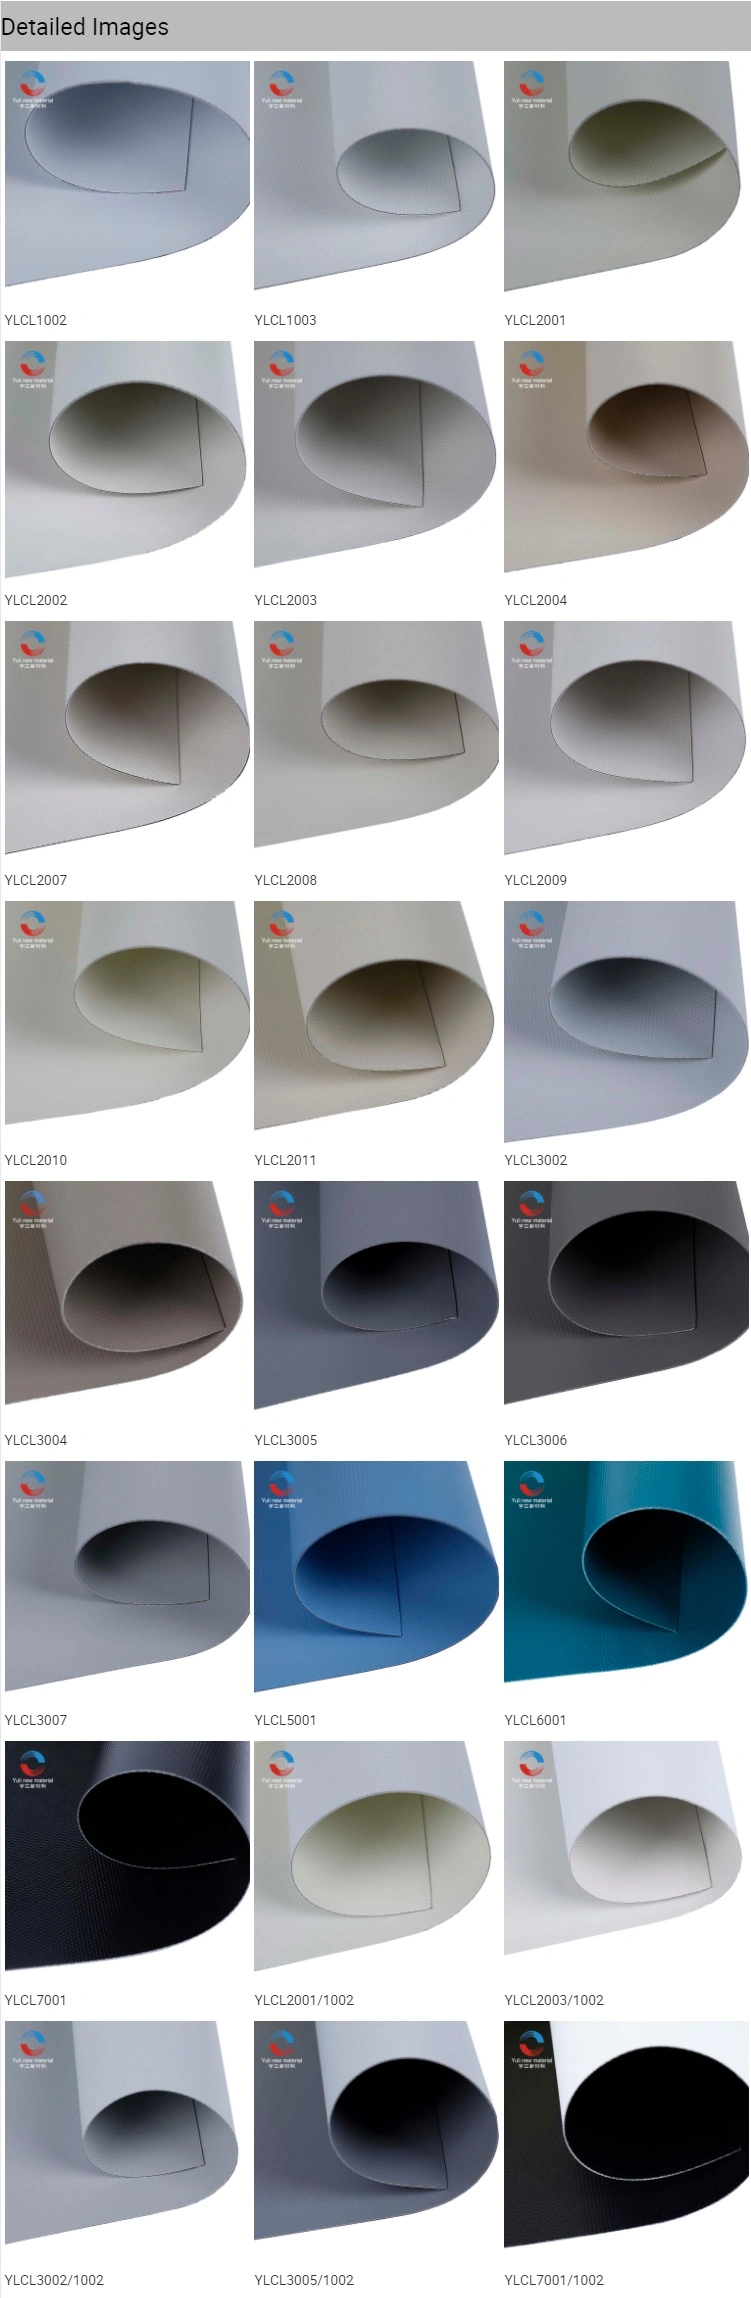 Ylcl7001 Normal Fiberglass Window Curtain Material for Roller Blinds Sunshade